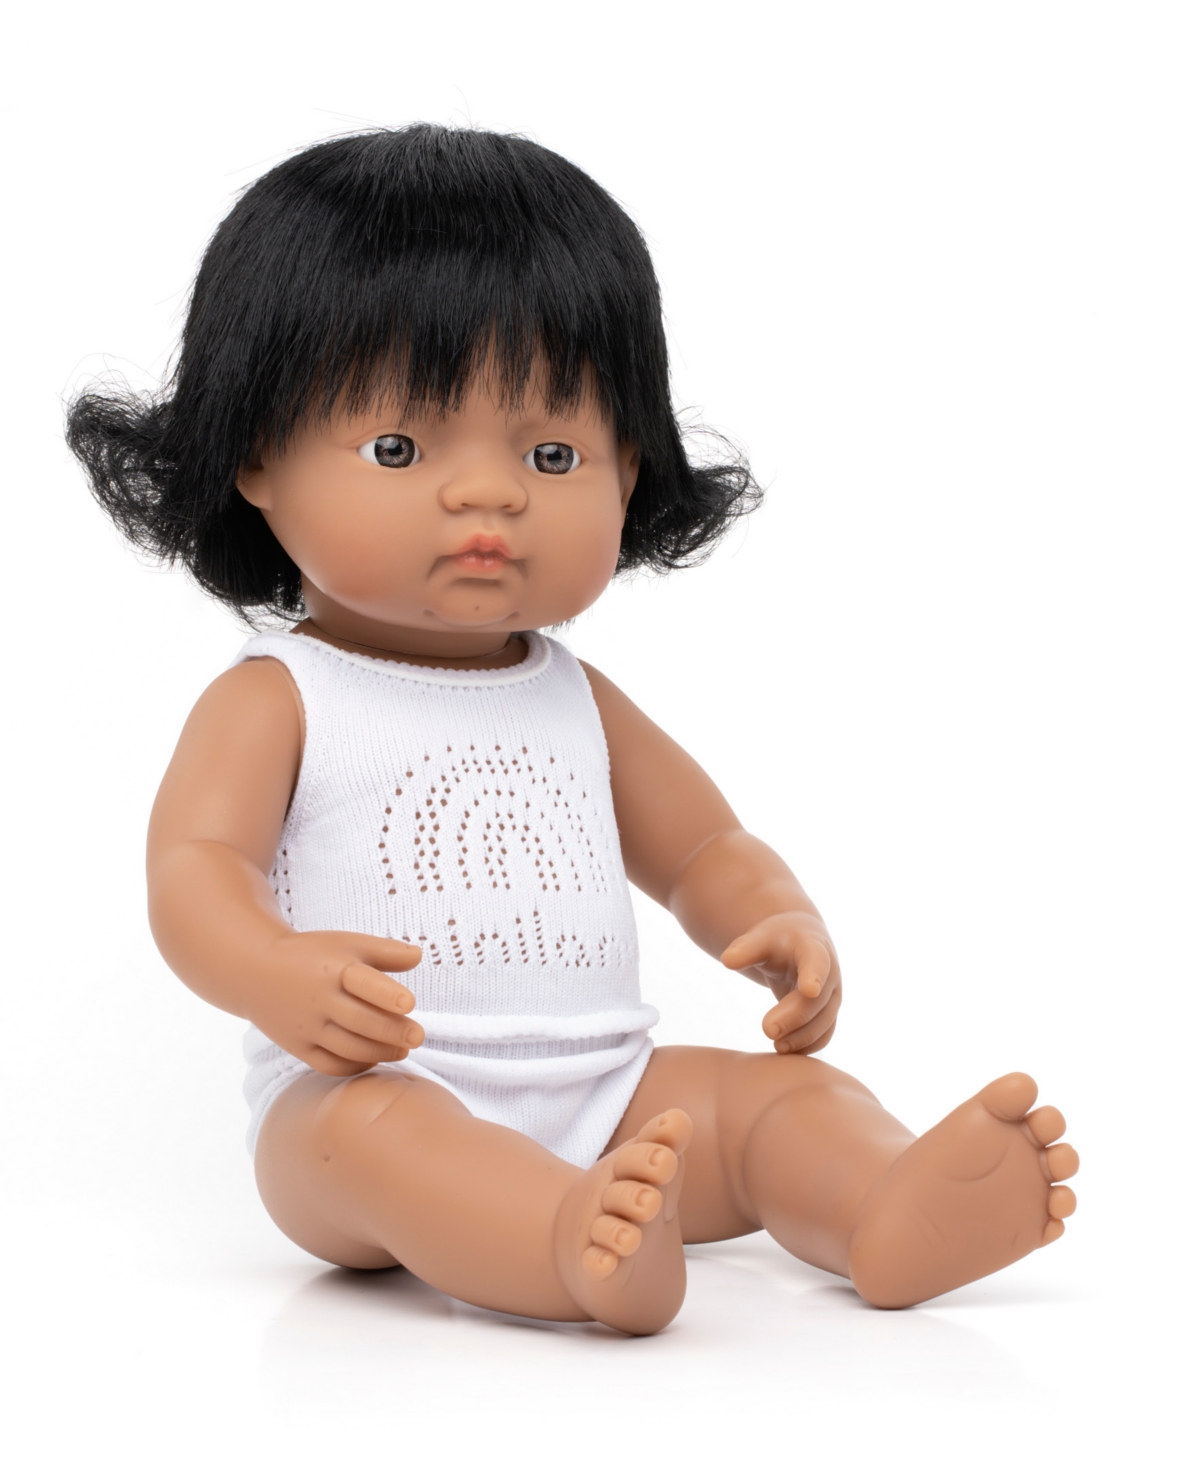 Miniland Kids' Baby Boy 15" Hispanic Doll With Hearing Aid In No Color